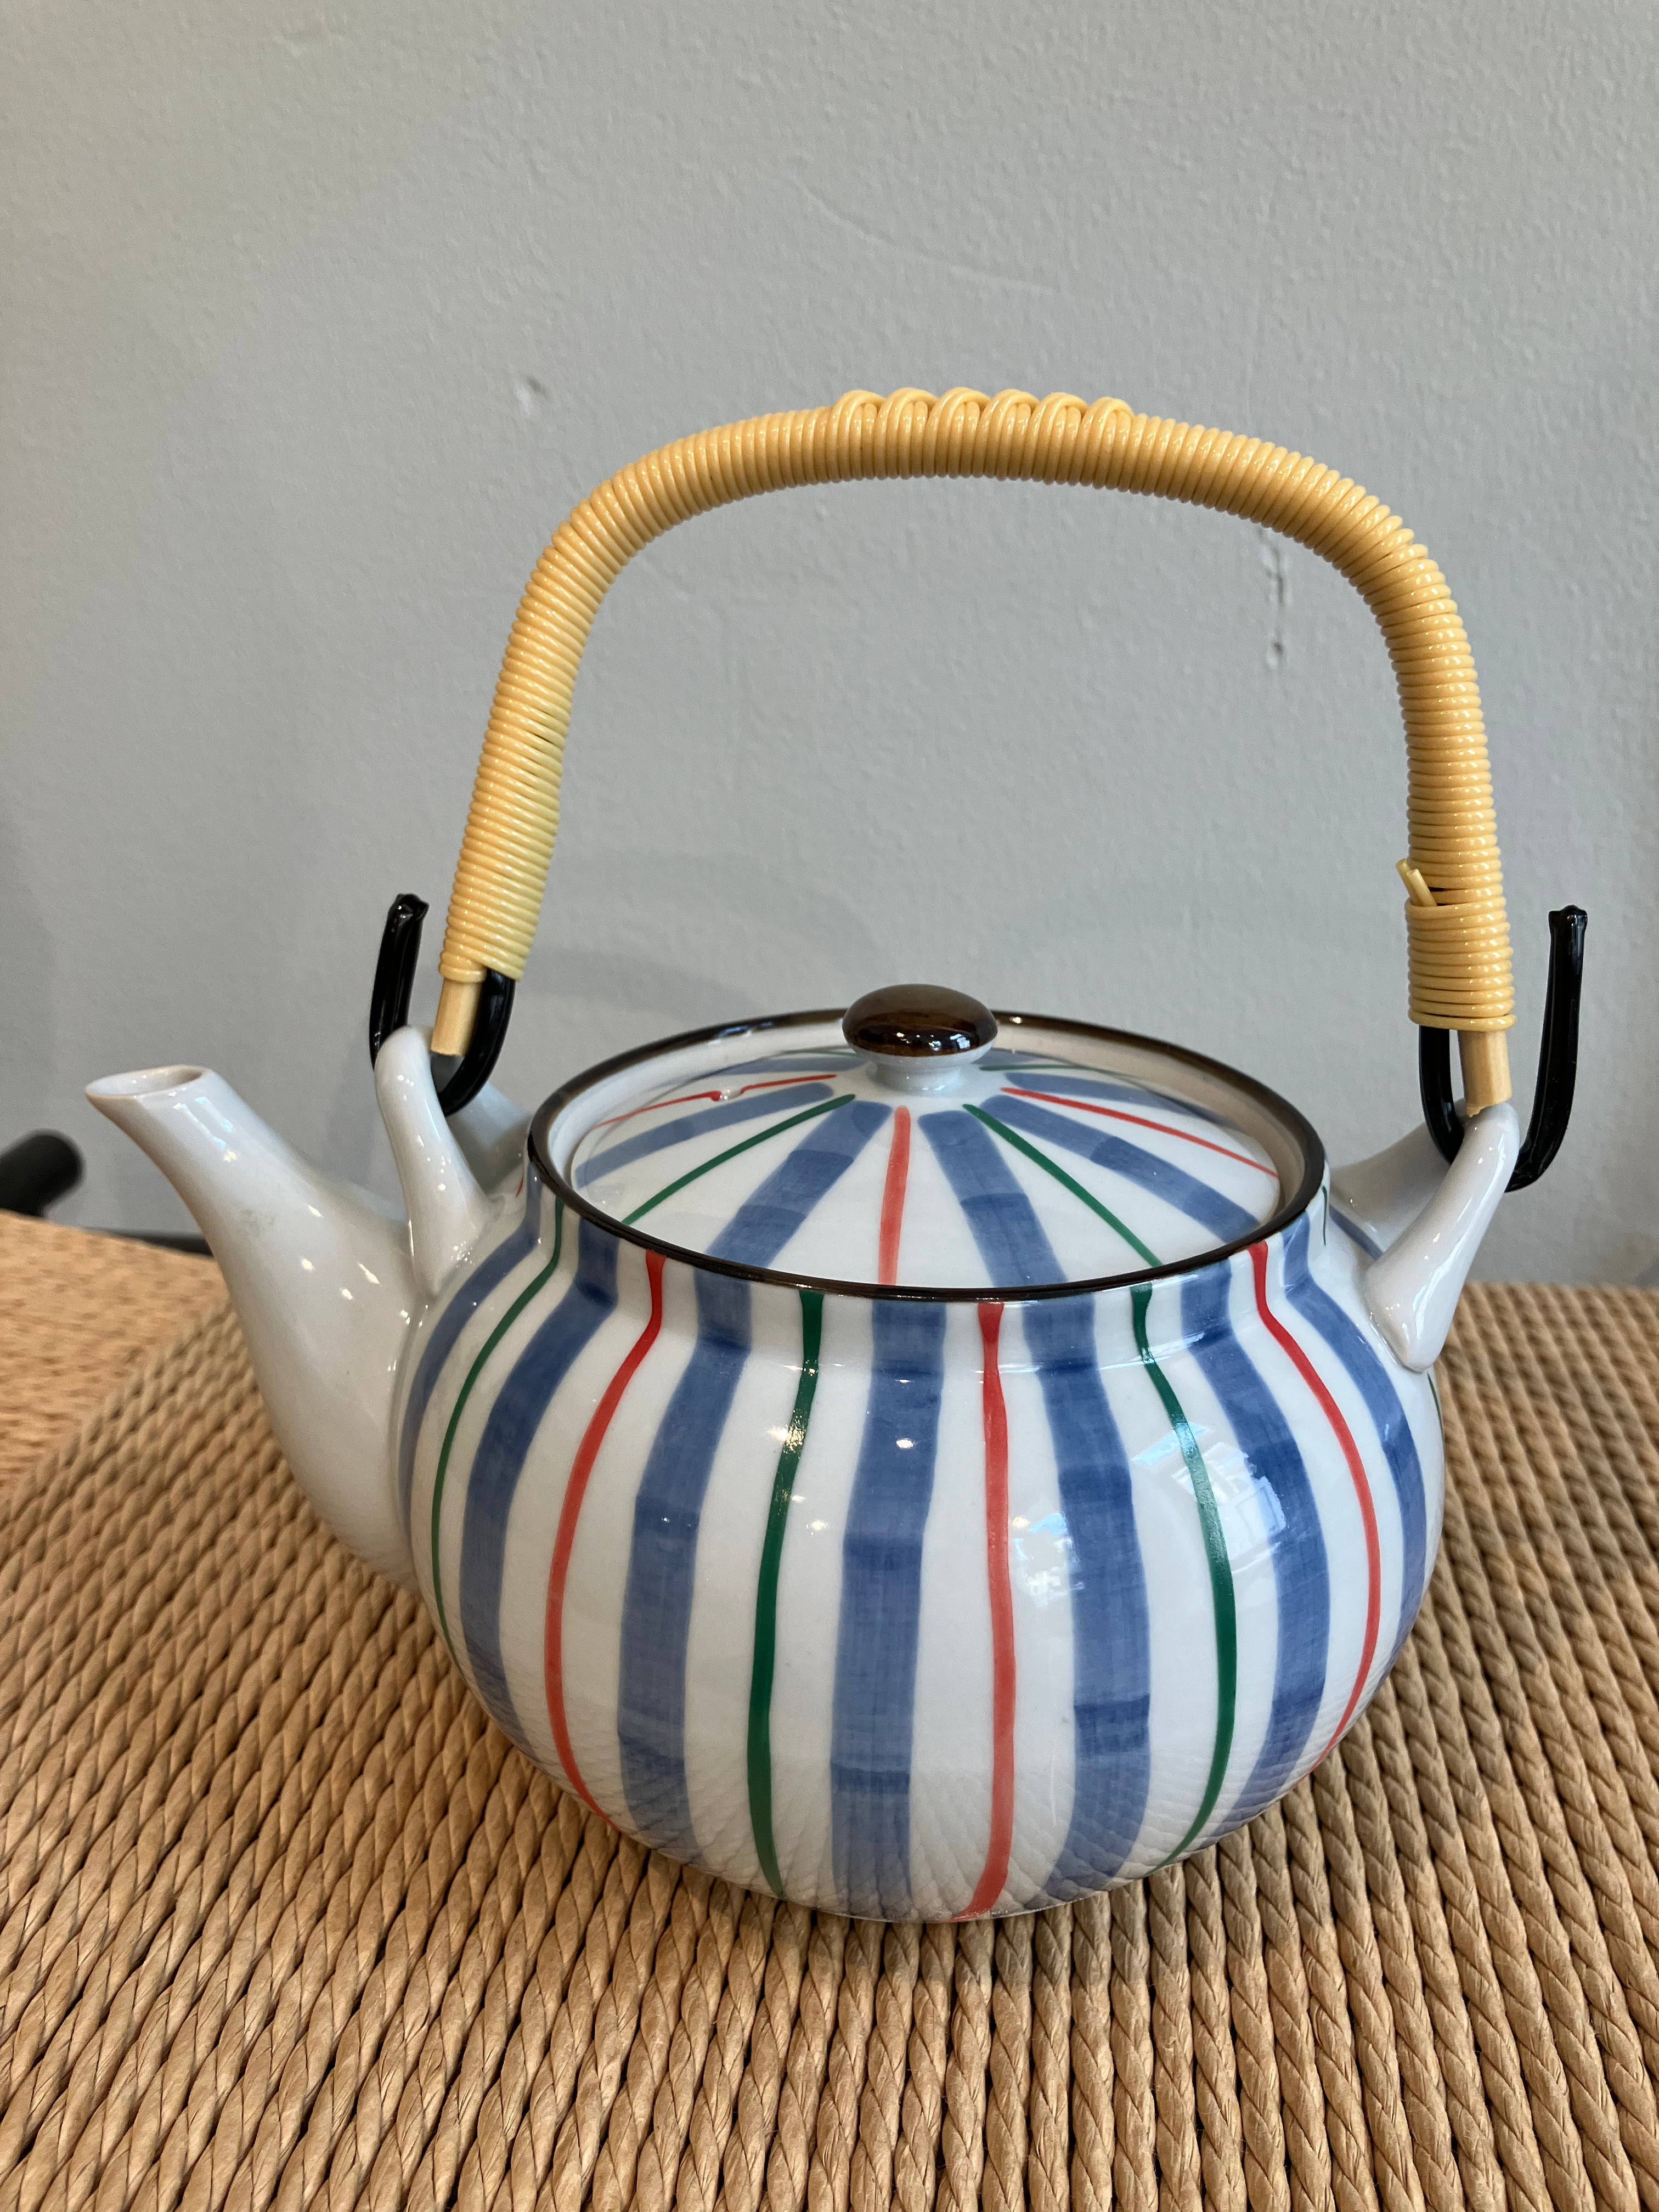 Japanese teapot with stripes and handle